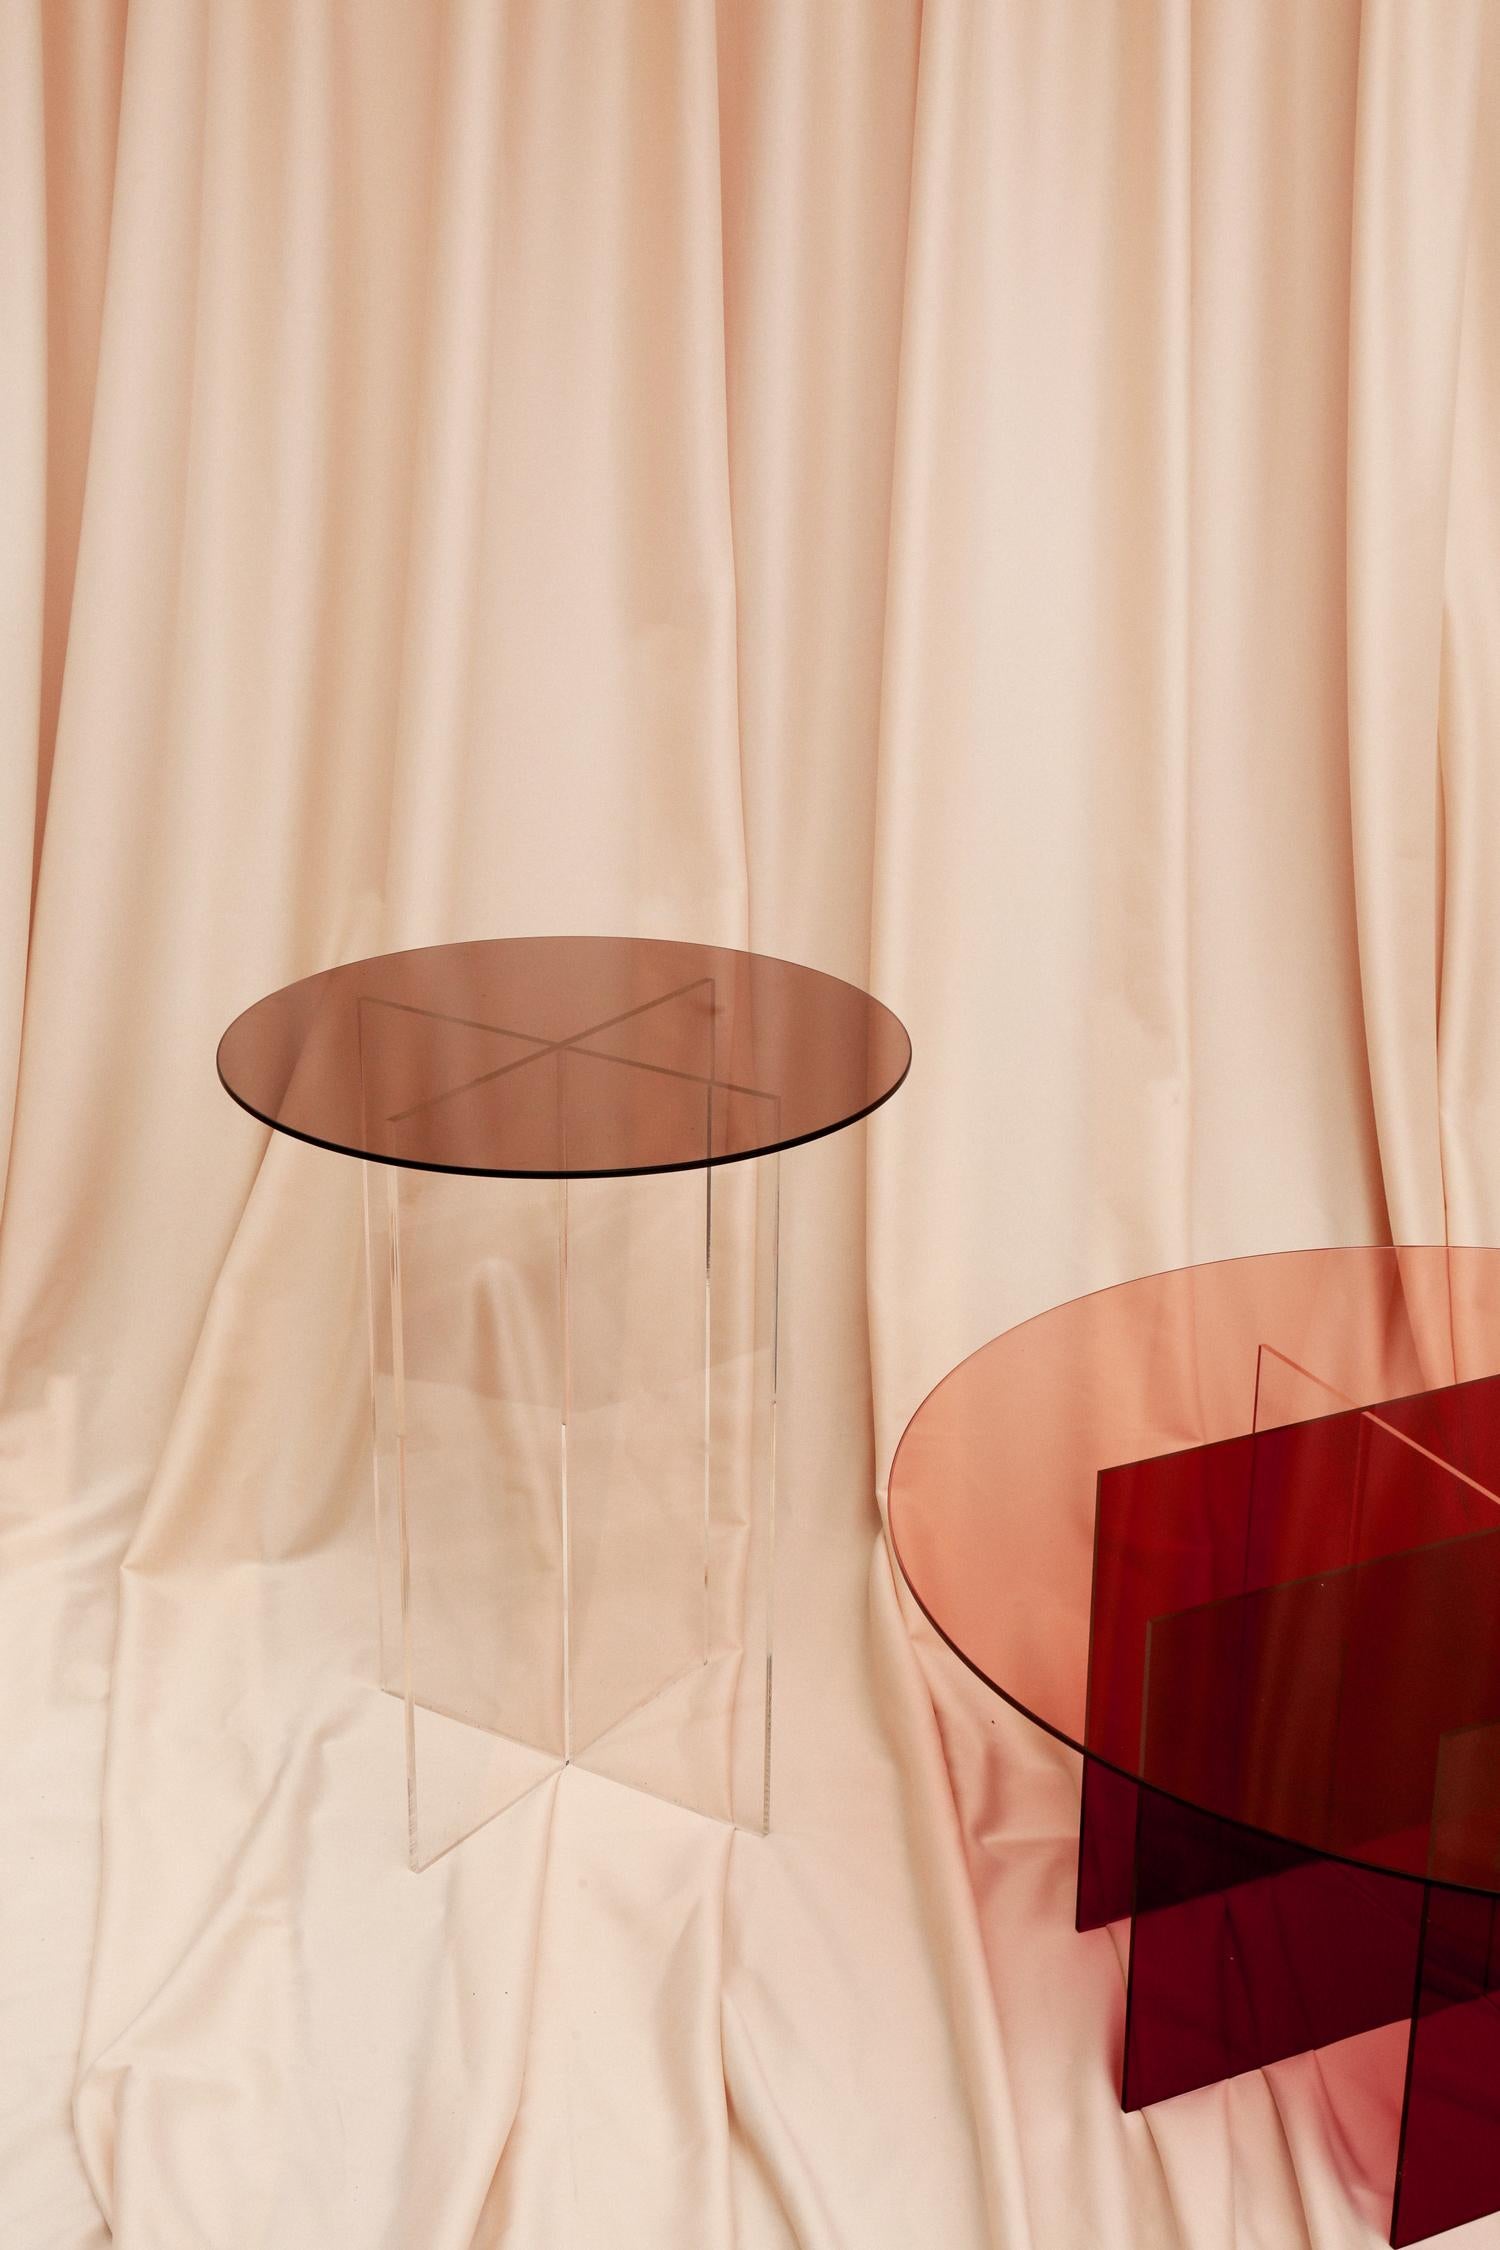 Modern Section Side Table, Smoked Glass or Clear Acrylic For Sale